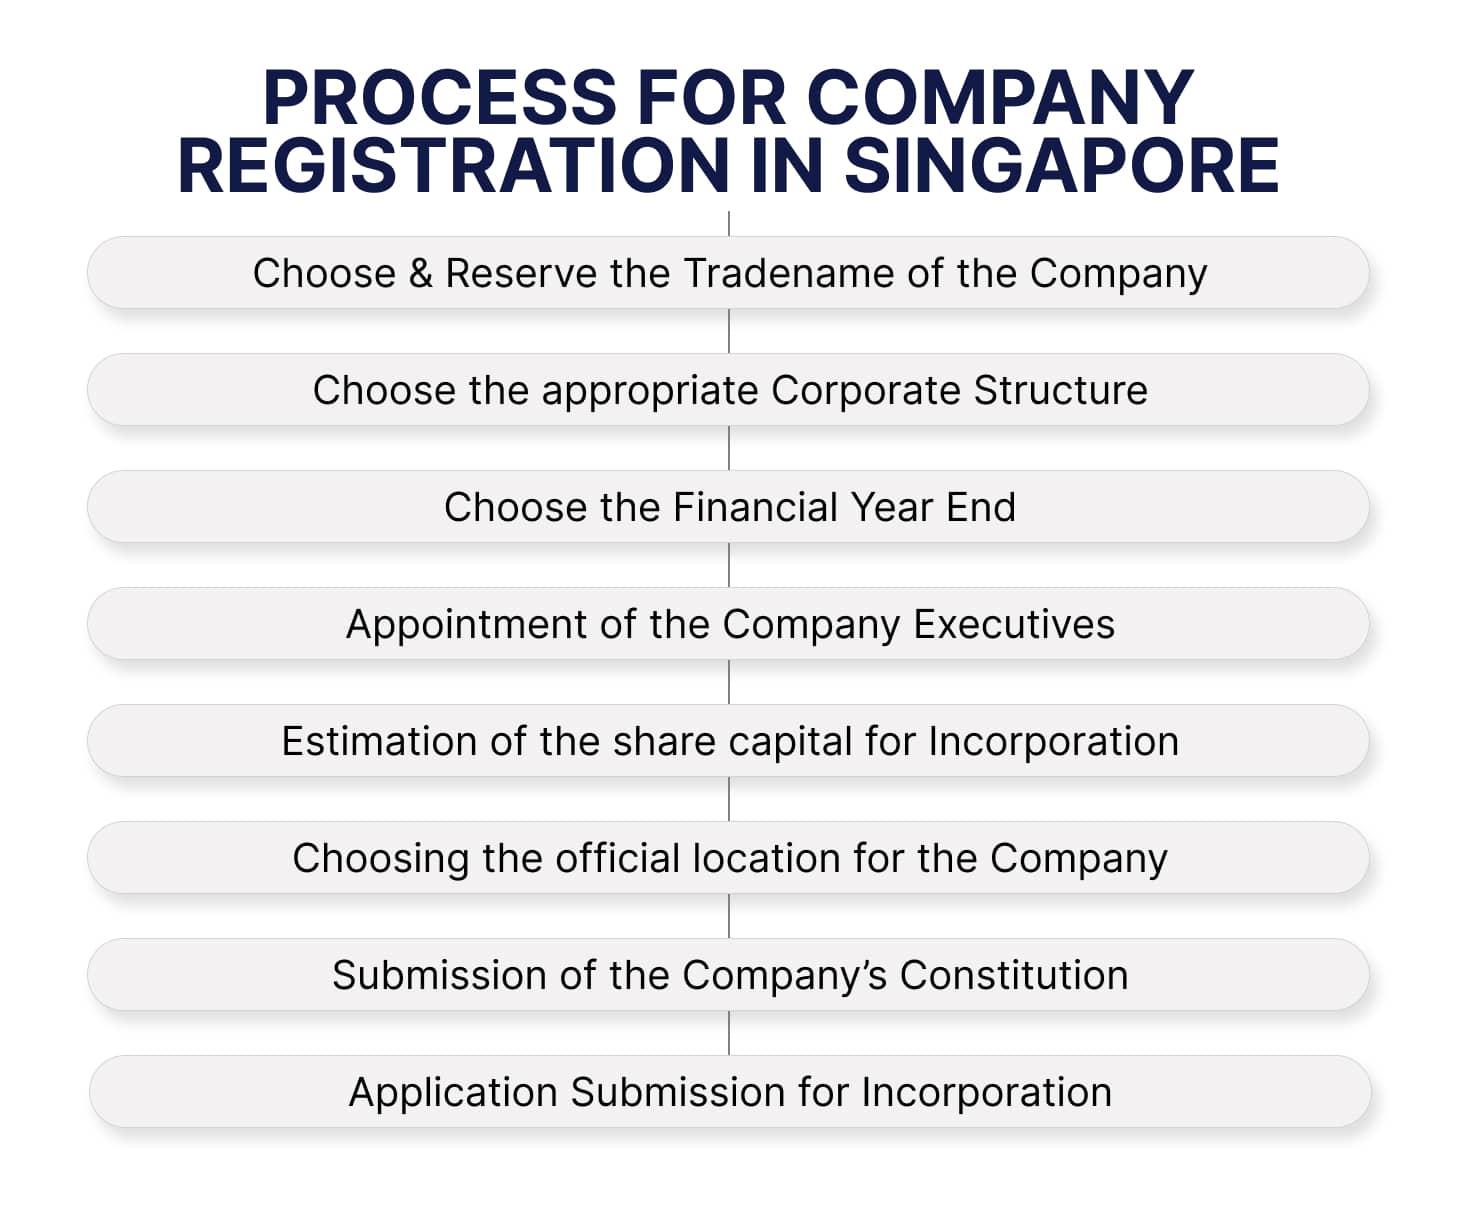 Process for Company Registration in Singapore